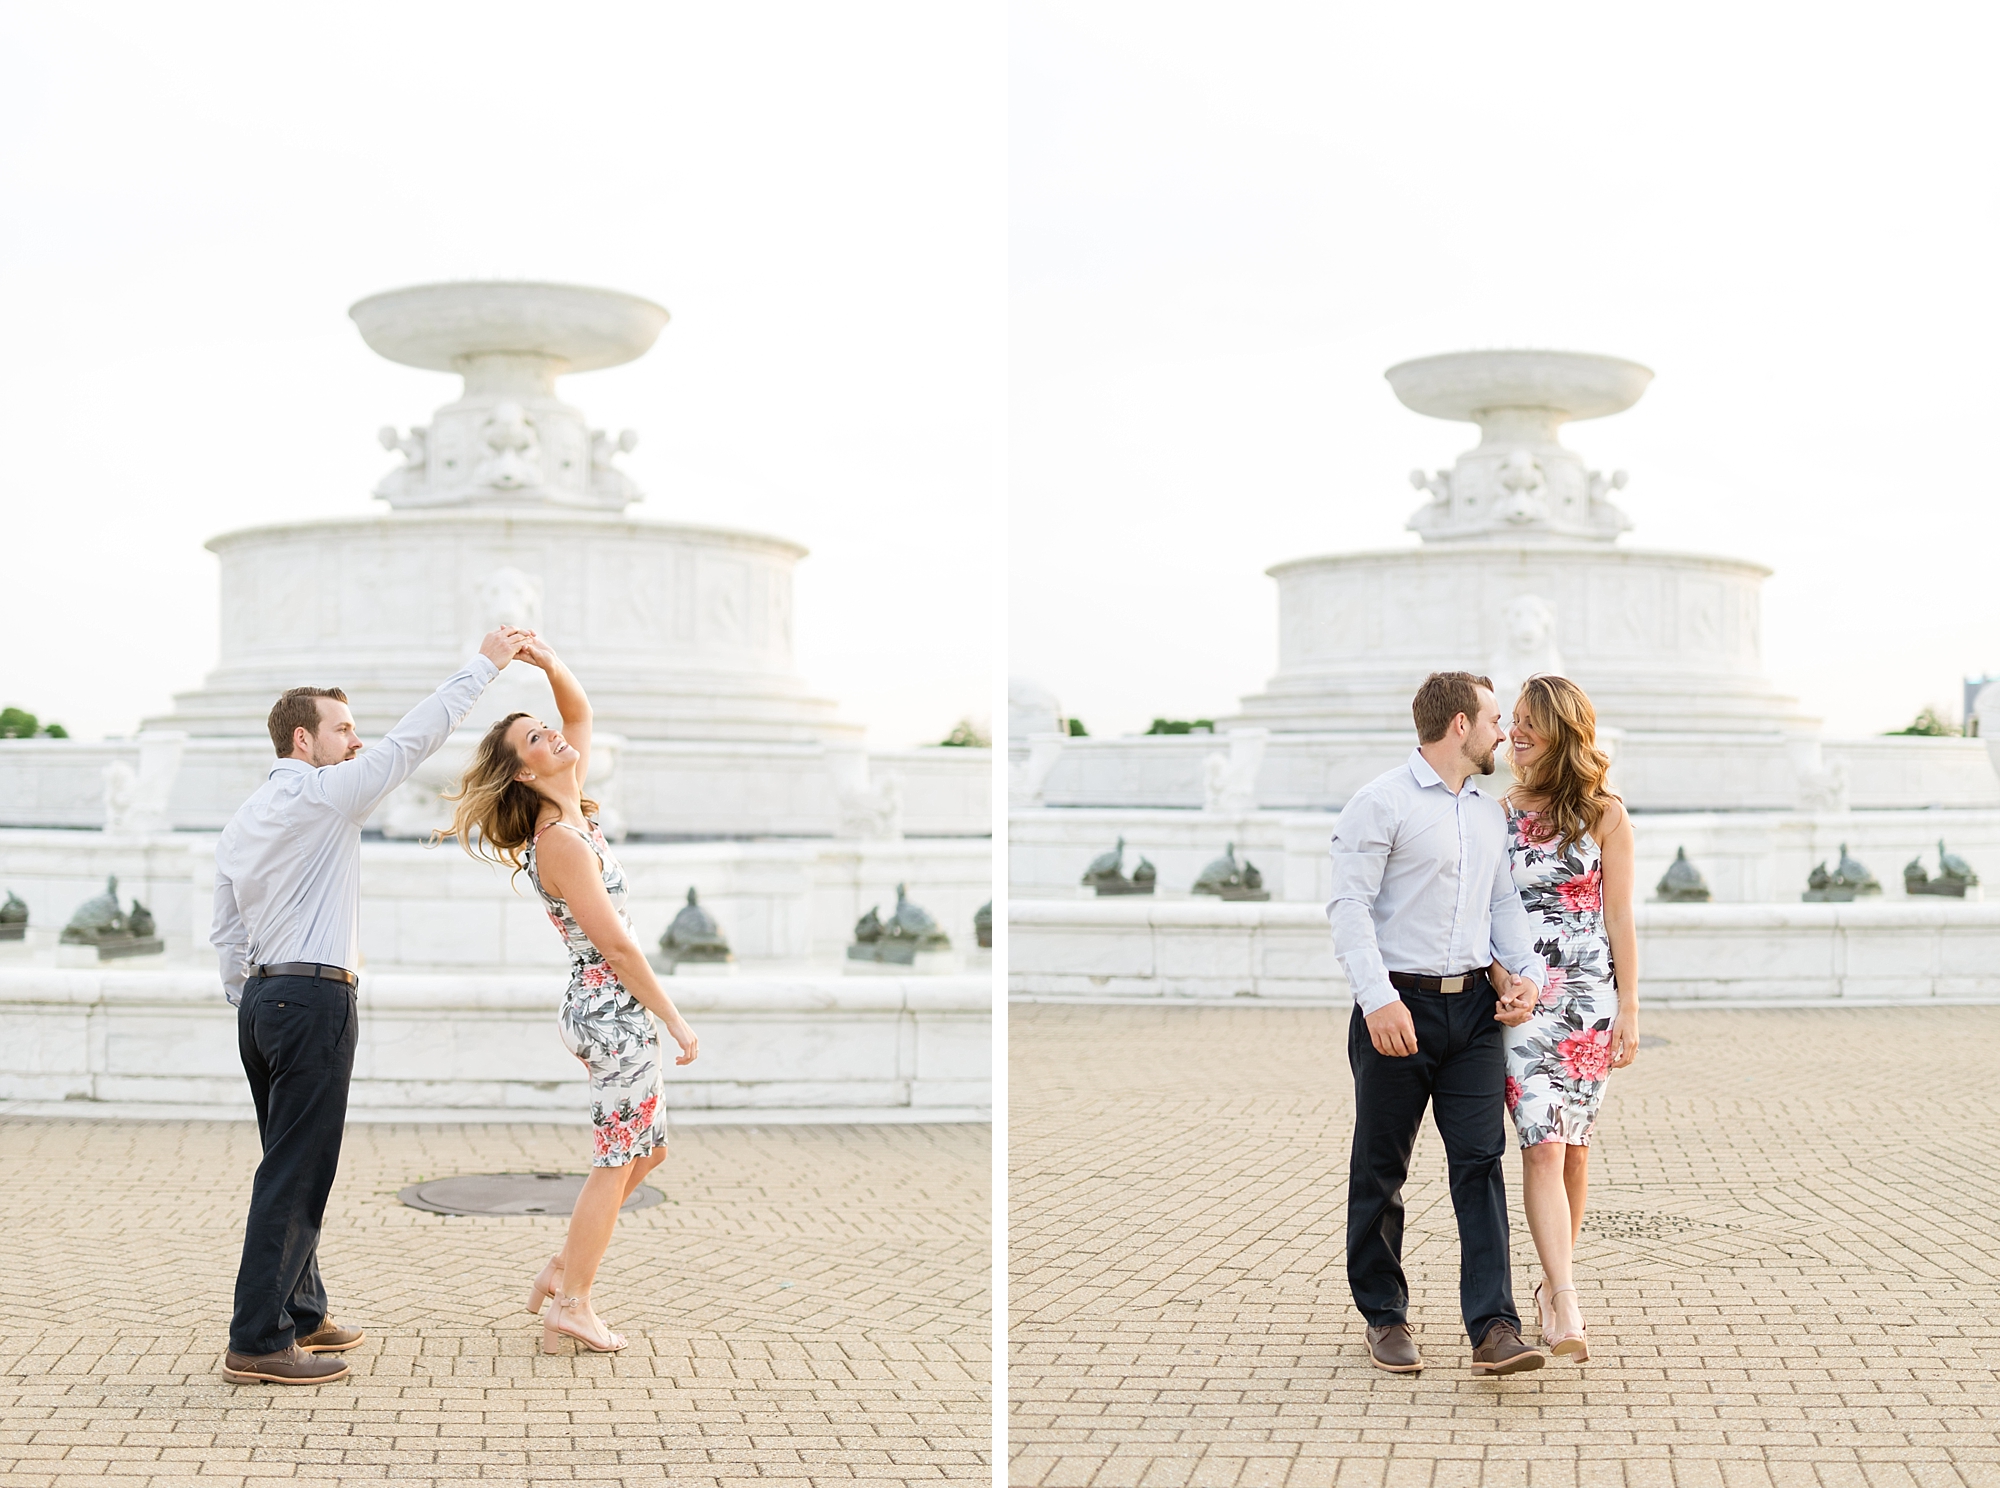 A lovely sunset May engagement session at Belle Isle and Dequindre Cut in Downtown Detroit, Michigan by Breanne Rochelle Photography.